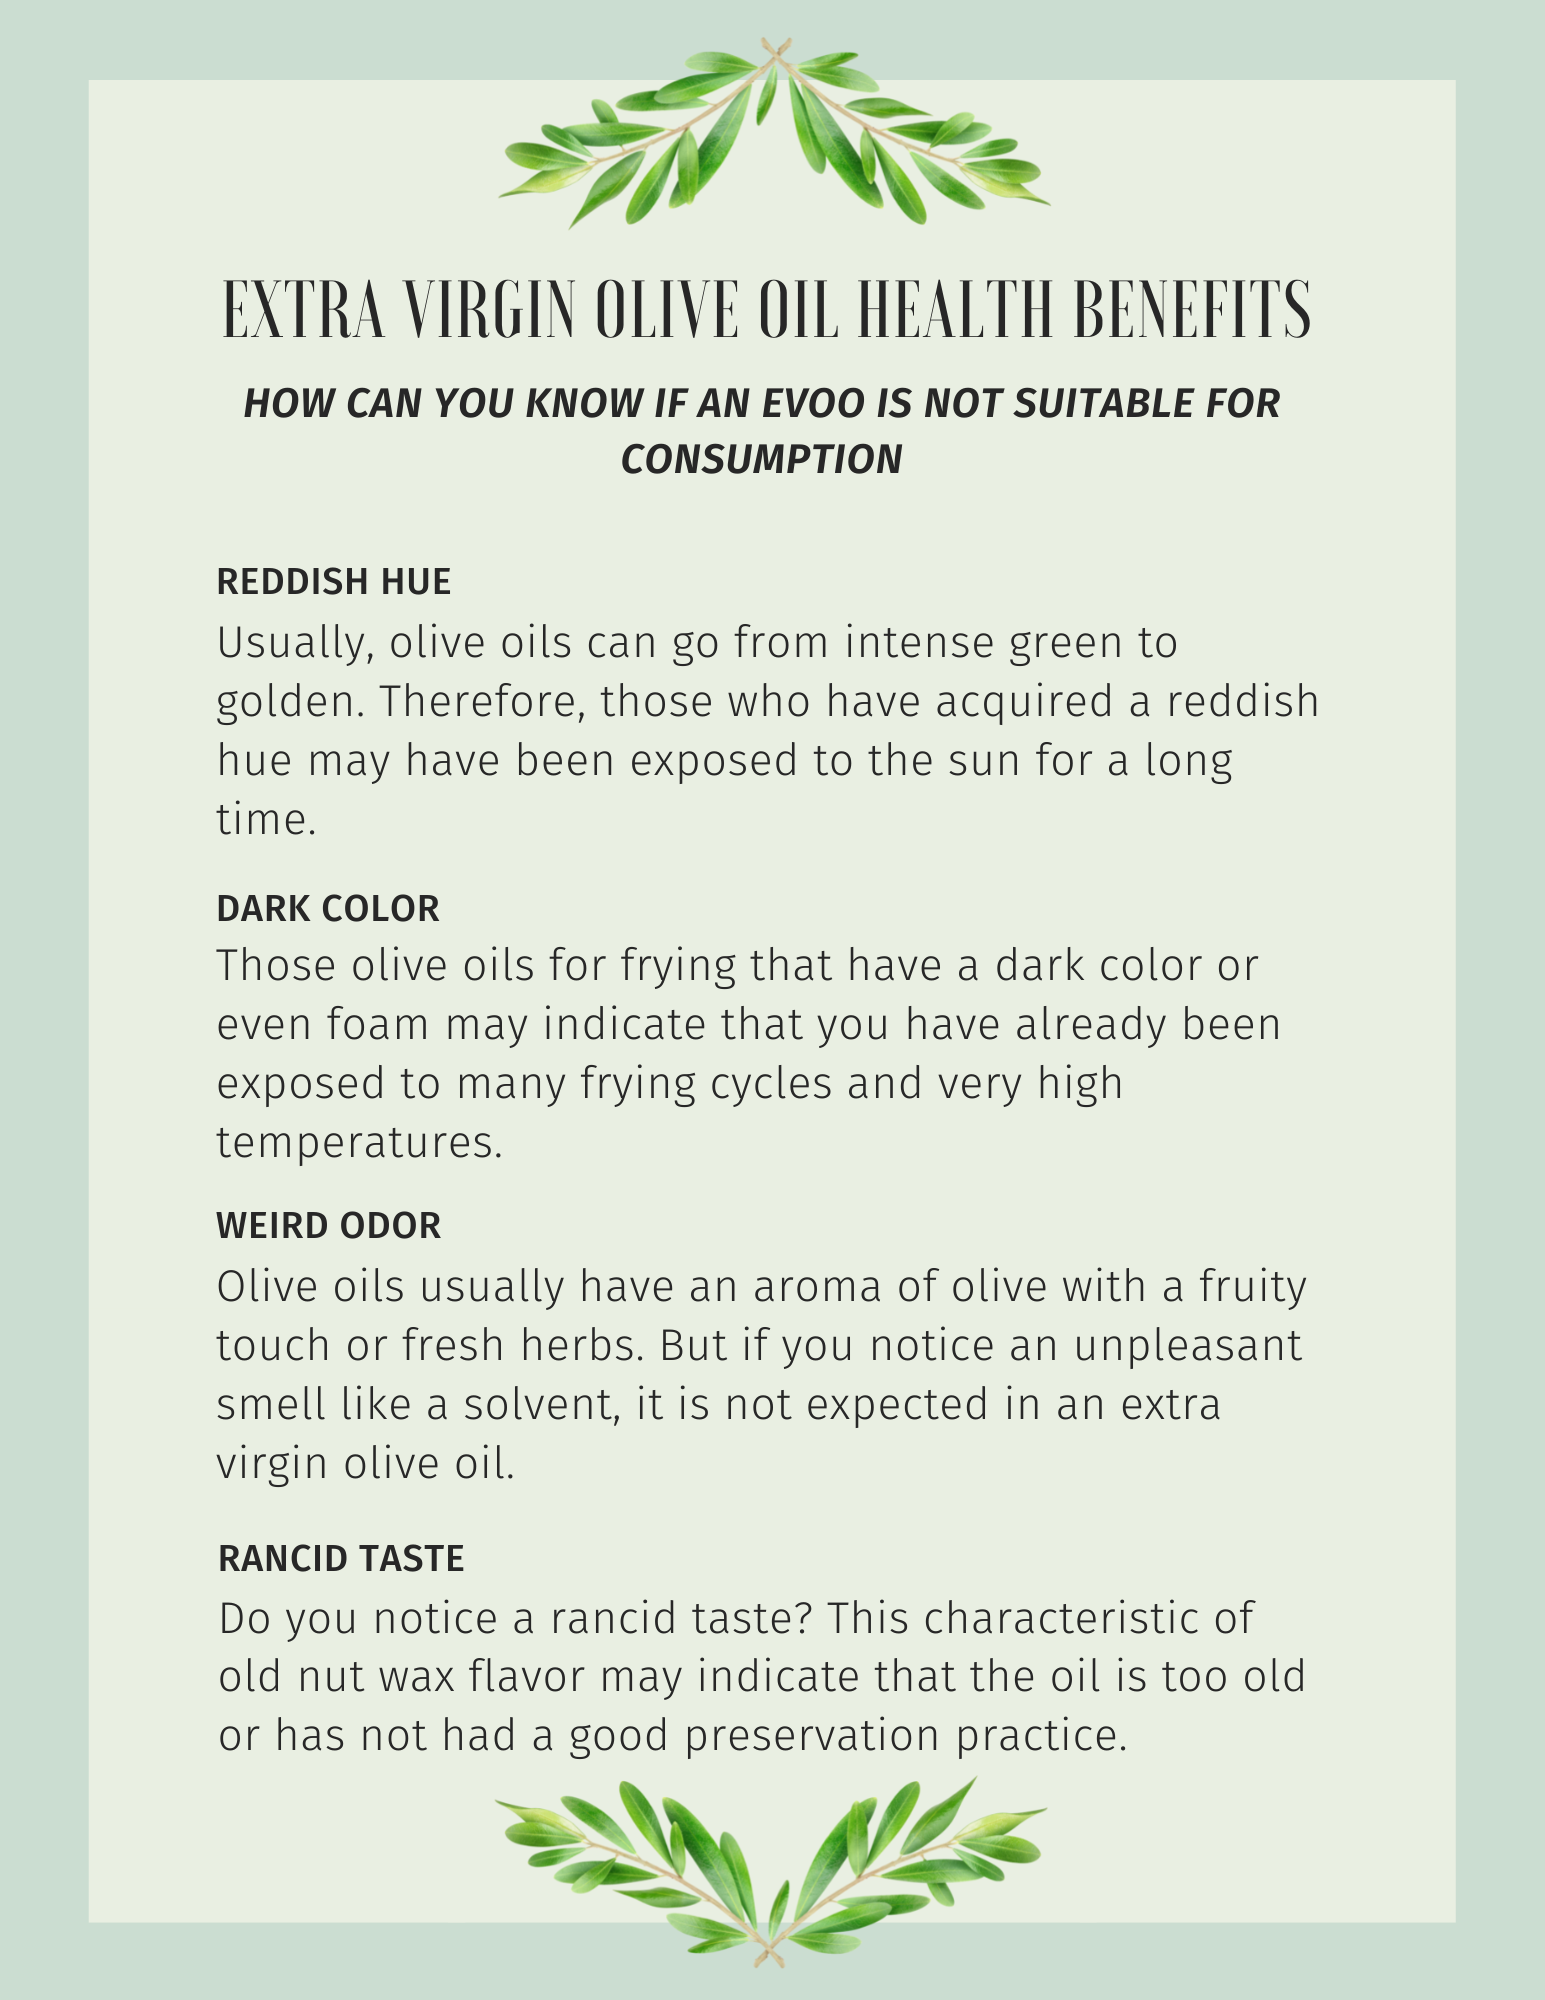 Olive oil extra virgin benefits - Infographic